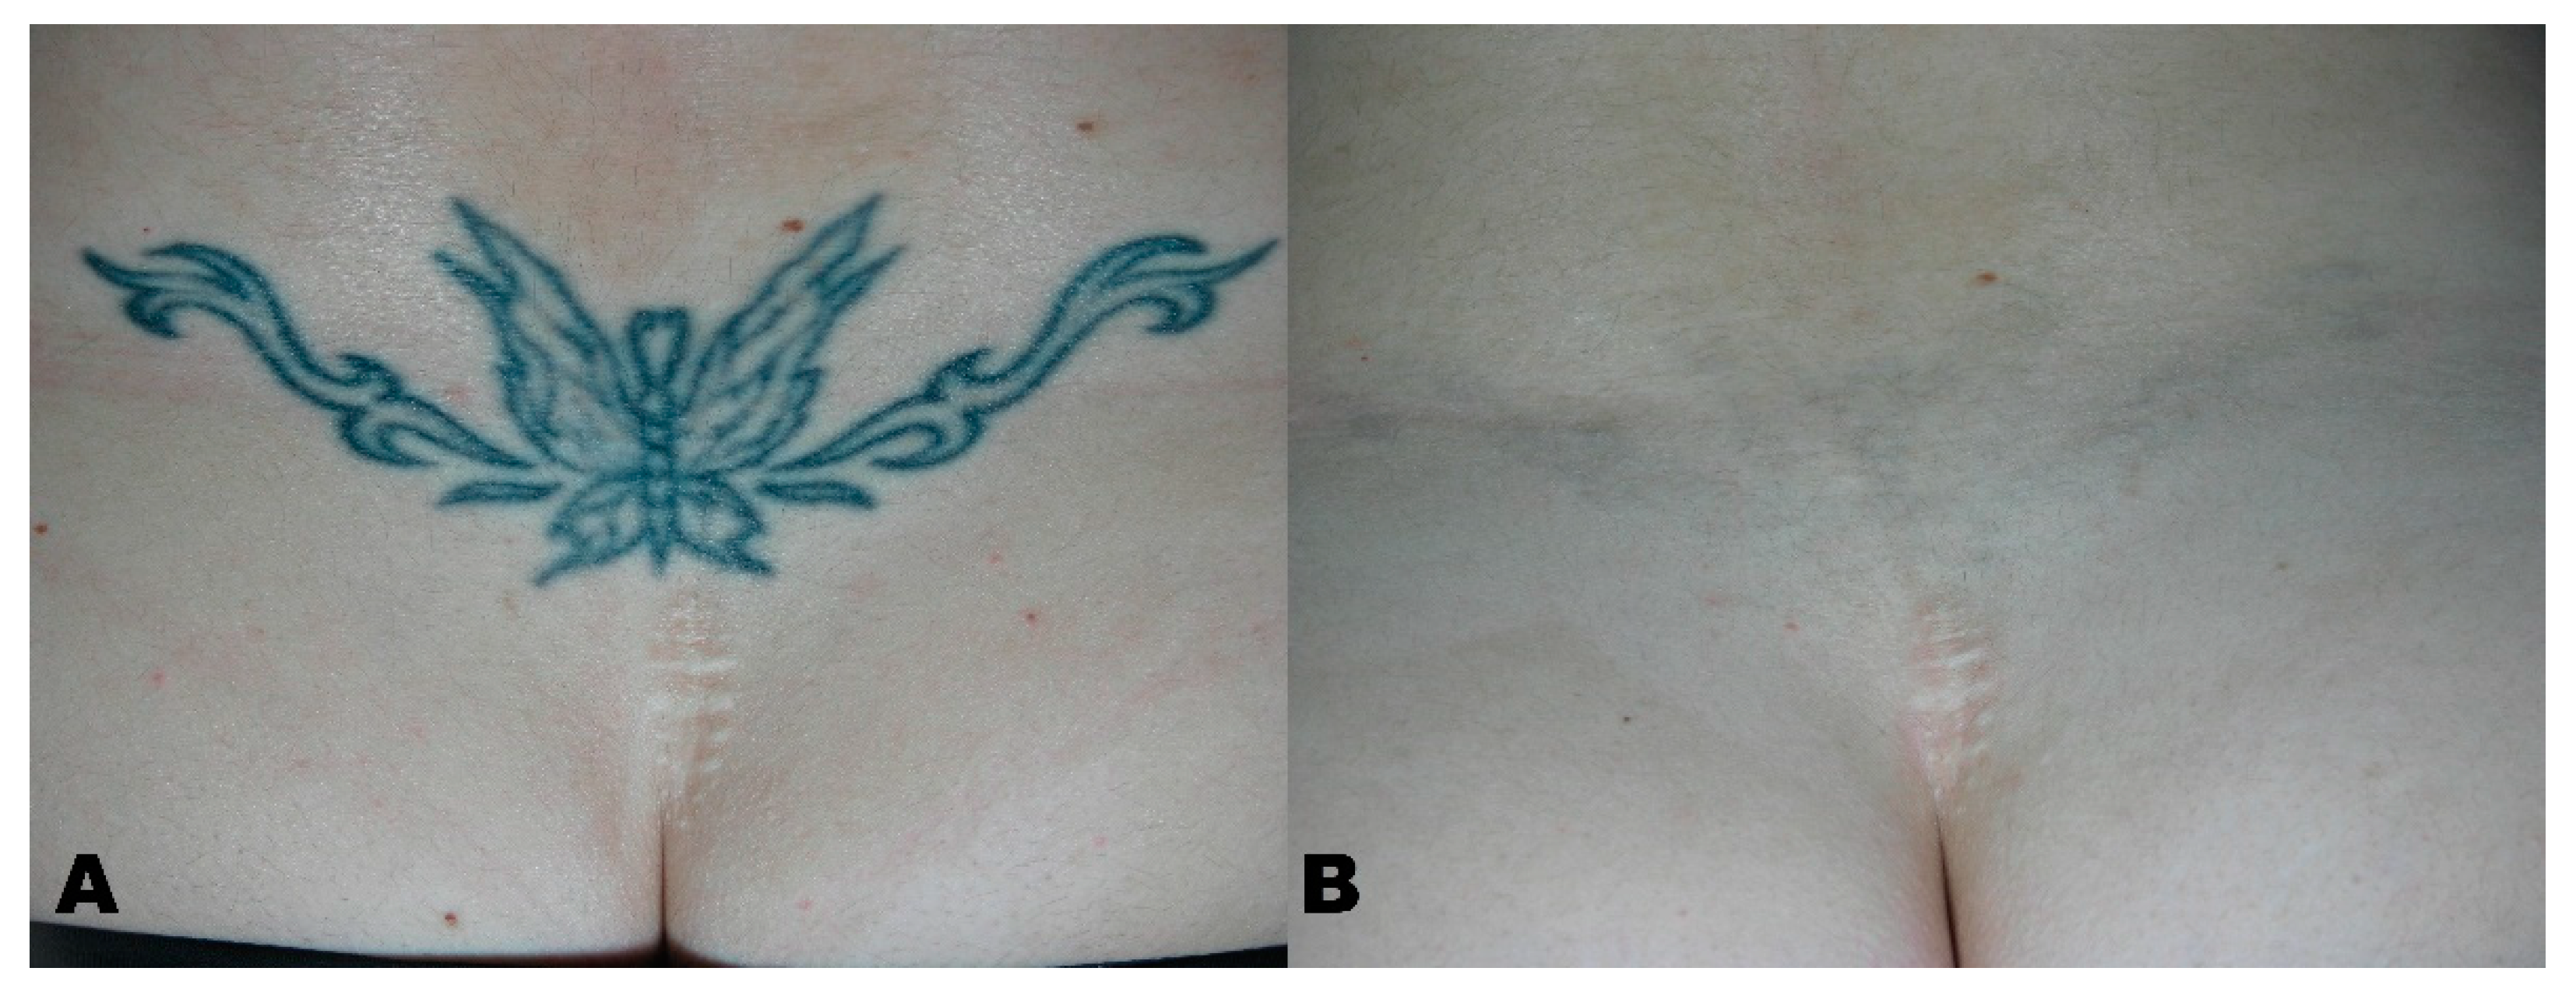 Tattoo removal progress after 25 laser sessions at 5 week intervals. :  r/interestingasfuck